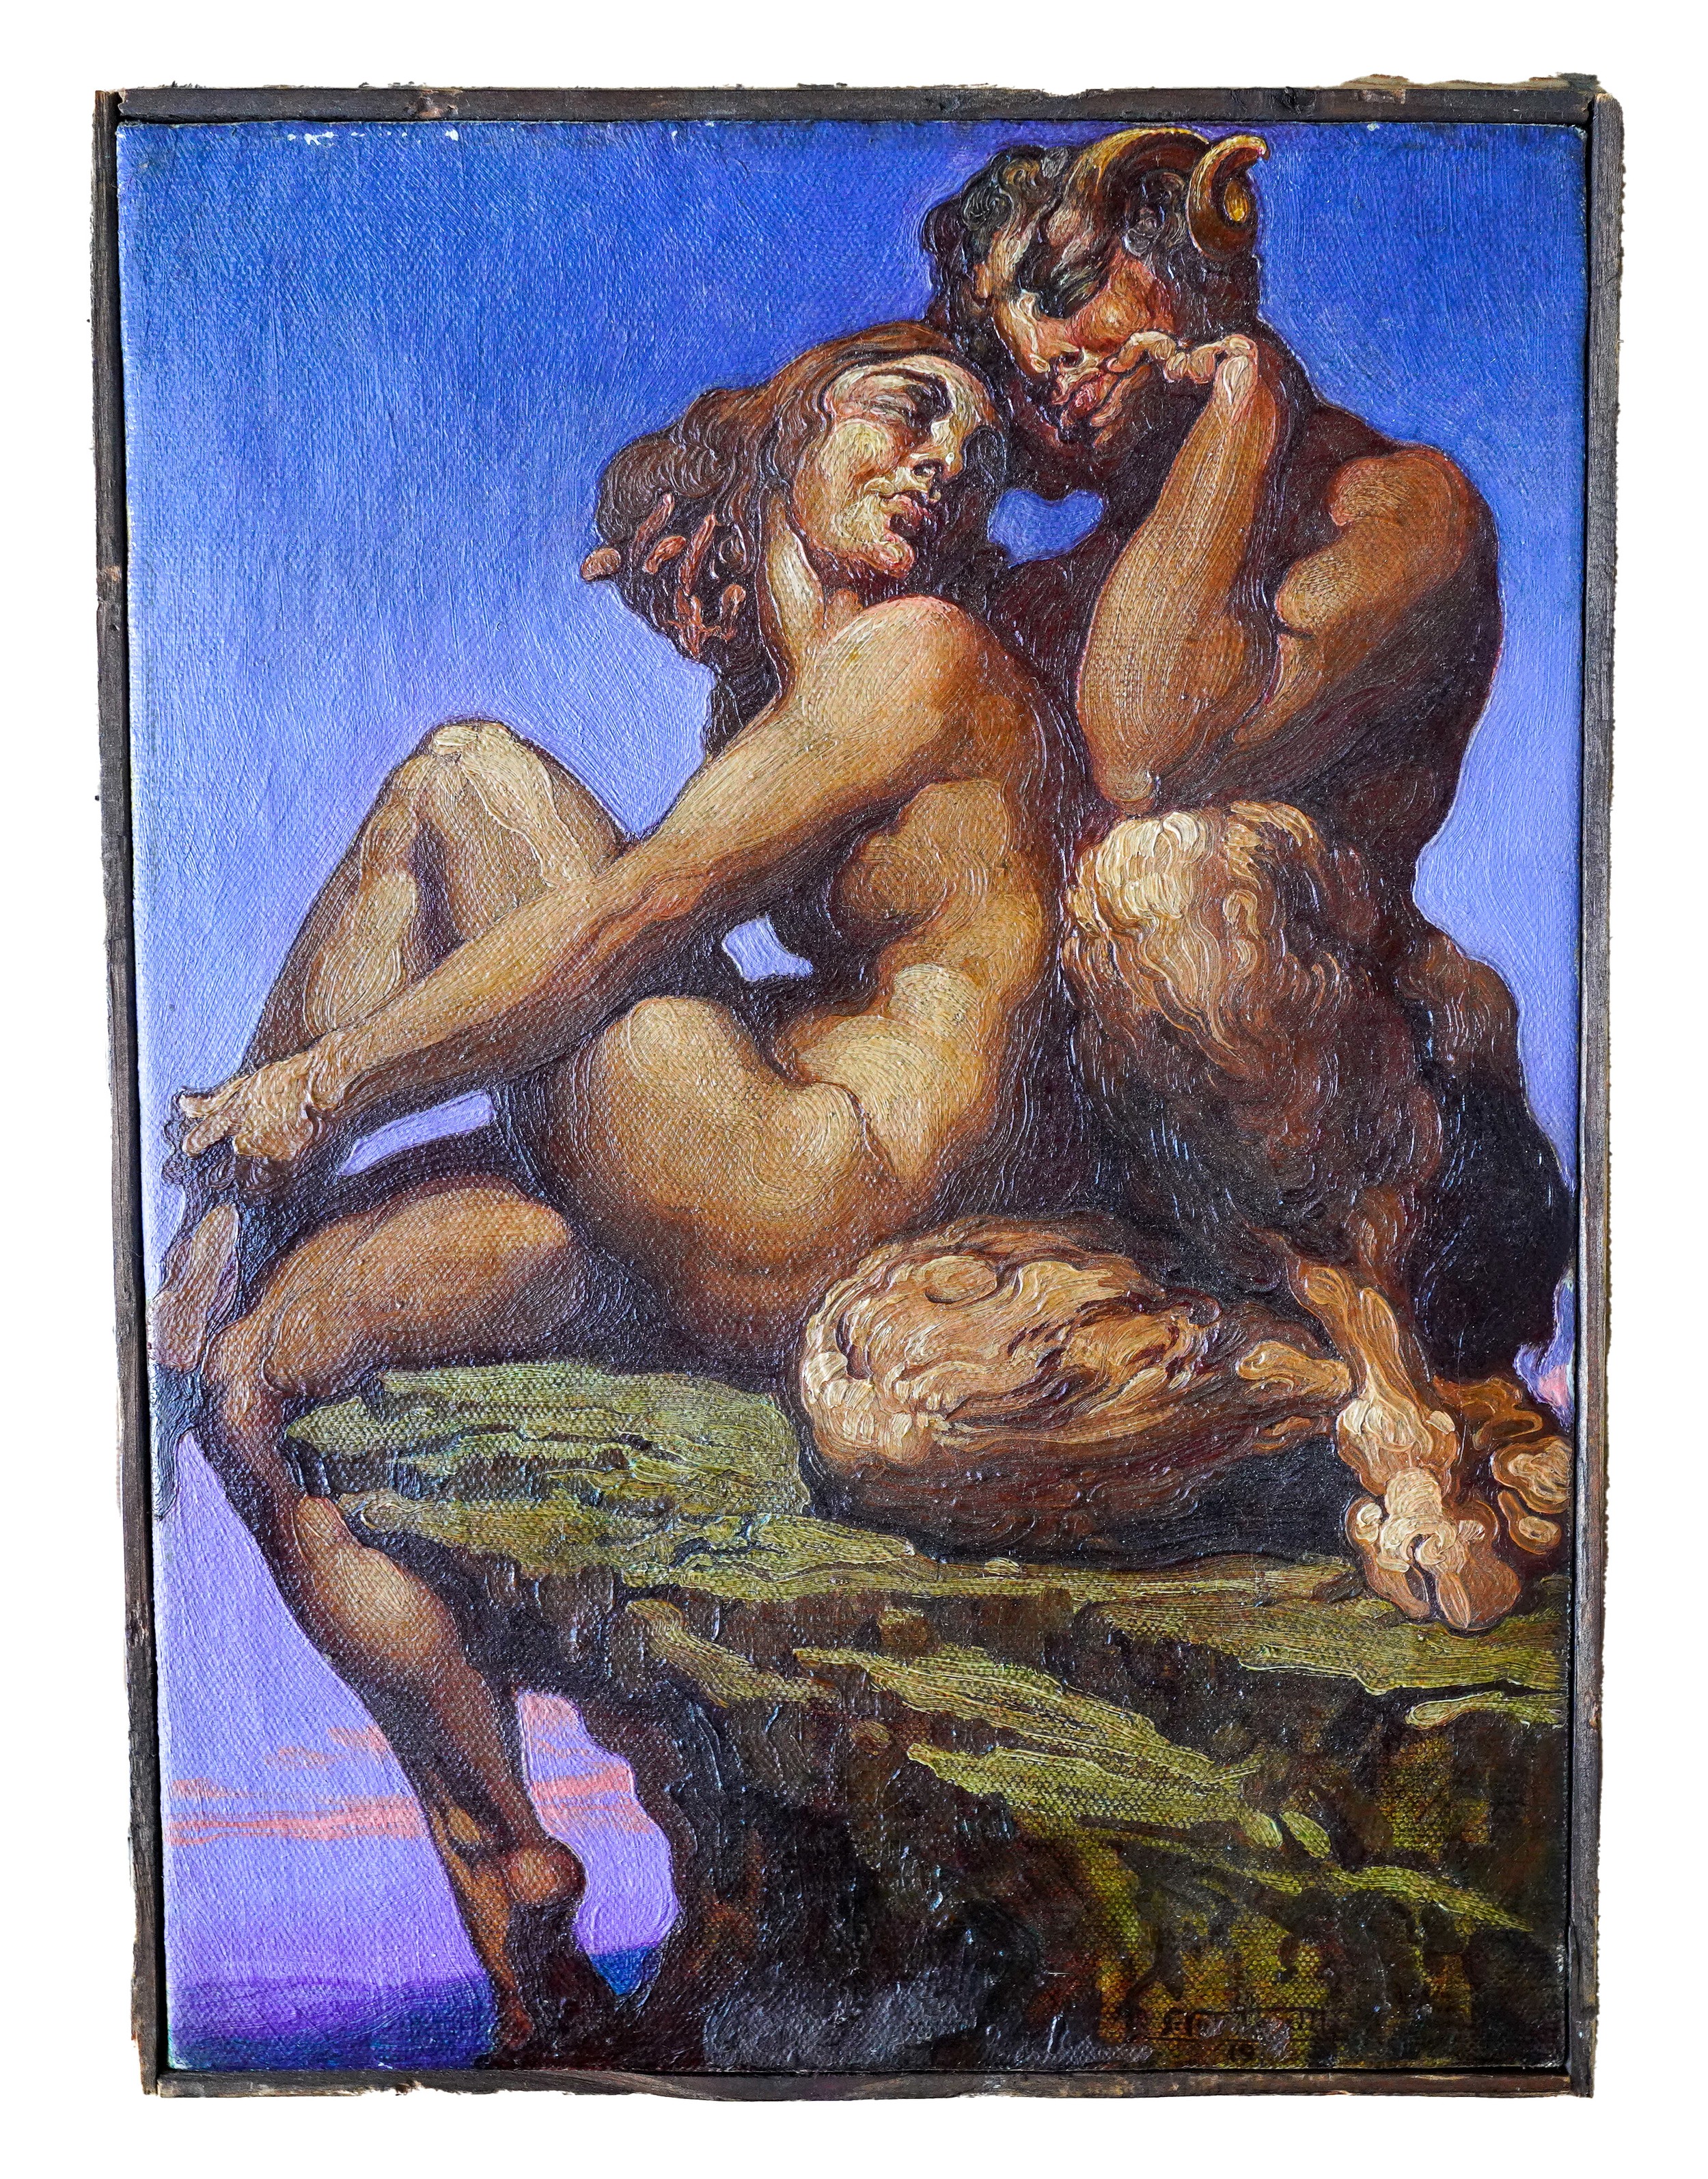 GERMAN OR AUSTRIAN SECESSIONIST SCHOOL, SATYR WITH A NYMPH ON A ROCKY OUTCROP, oil on canvas,